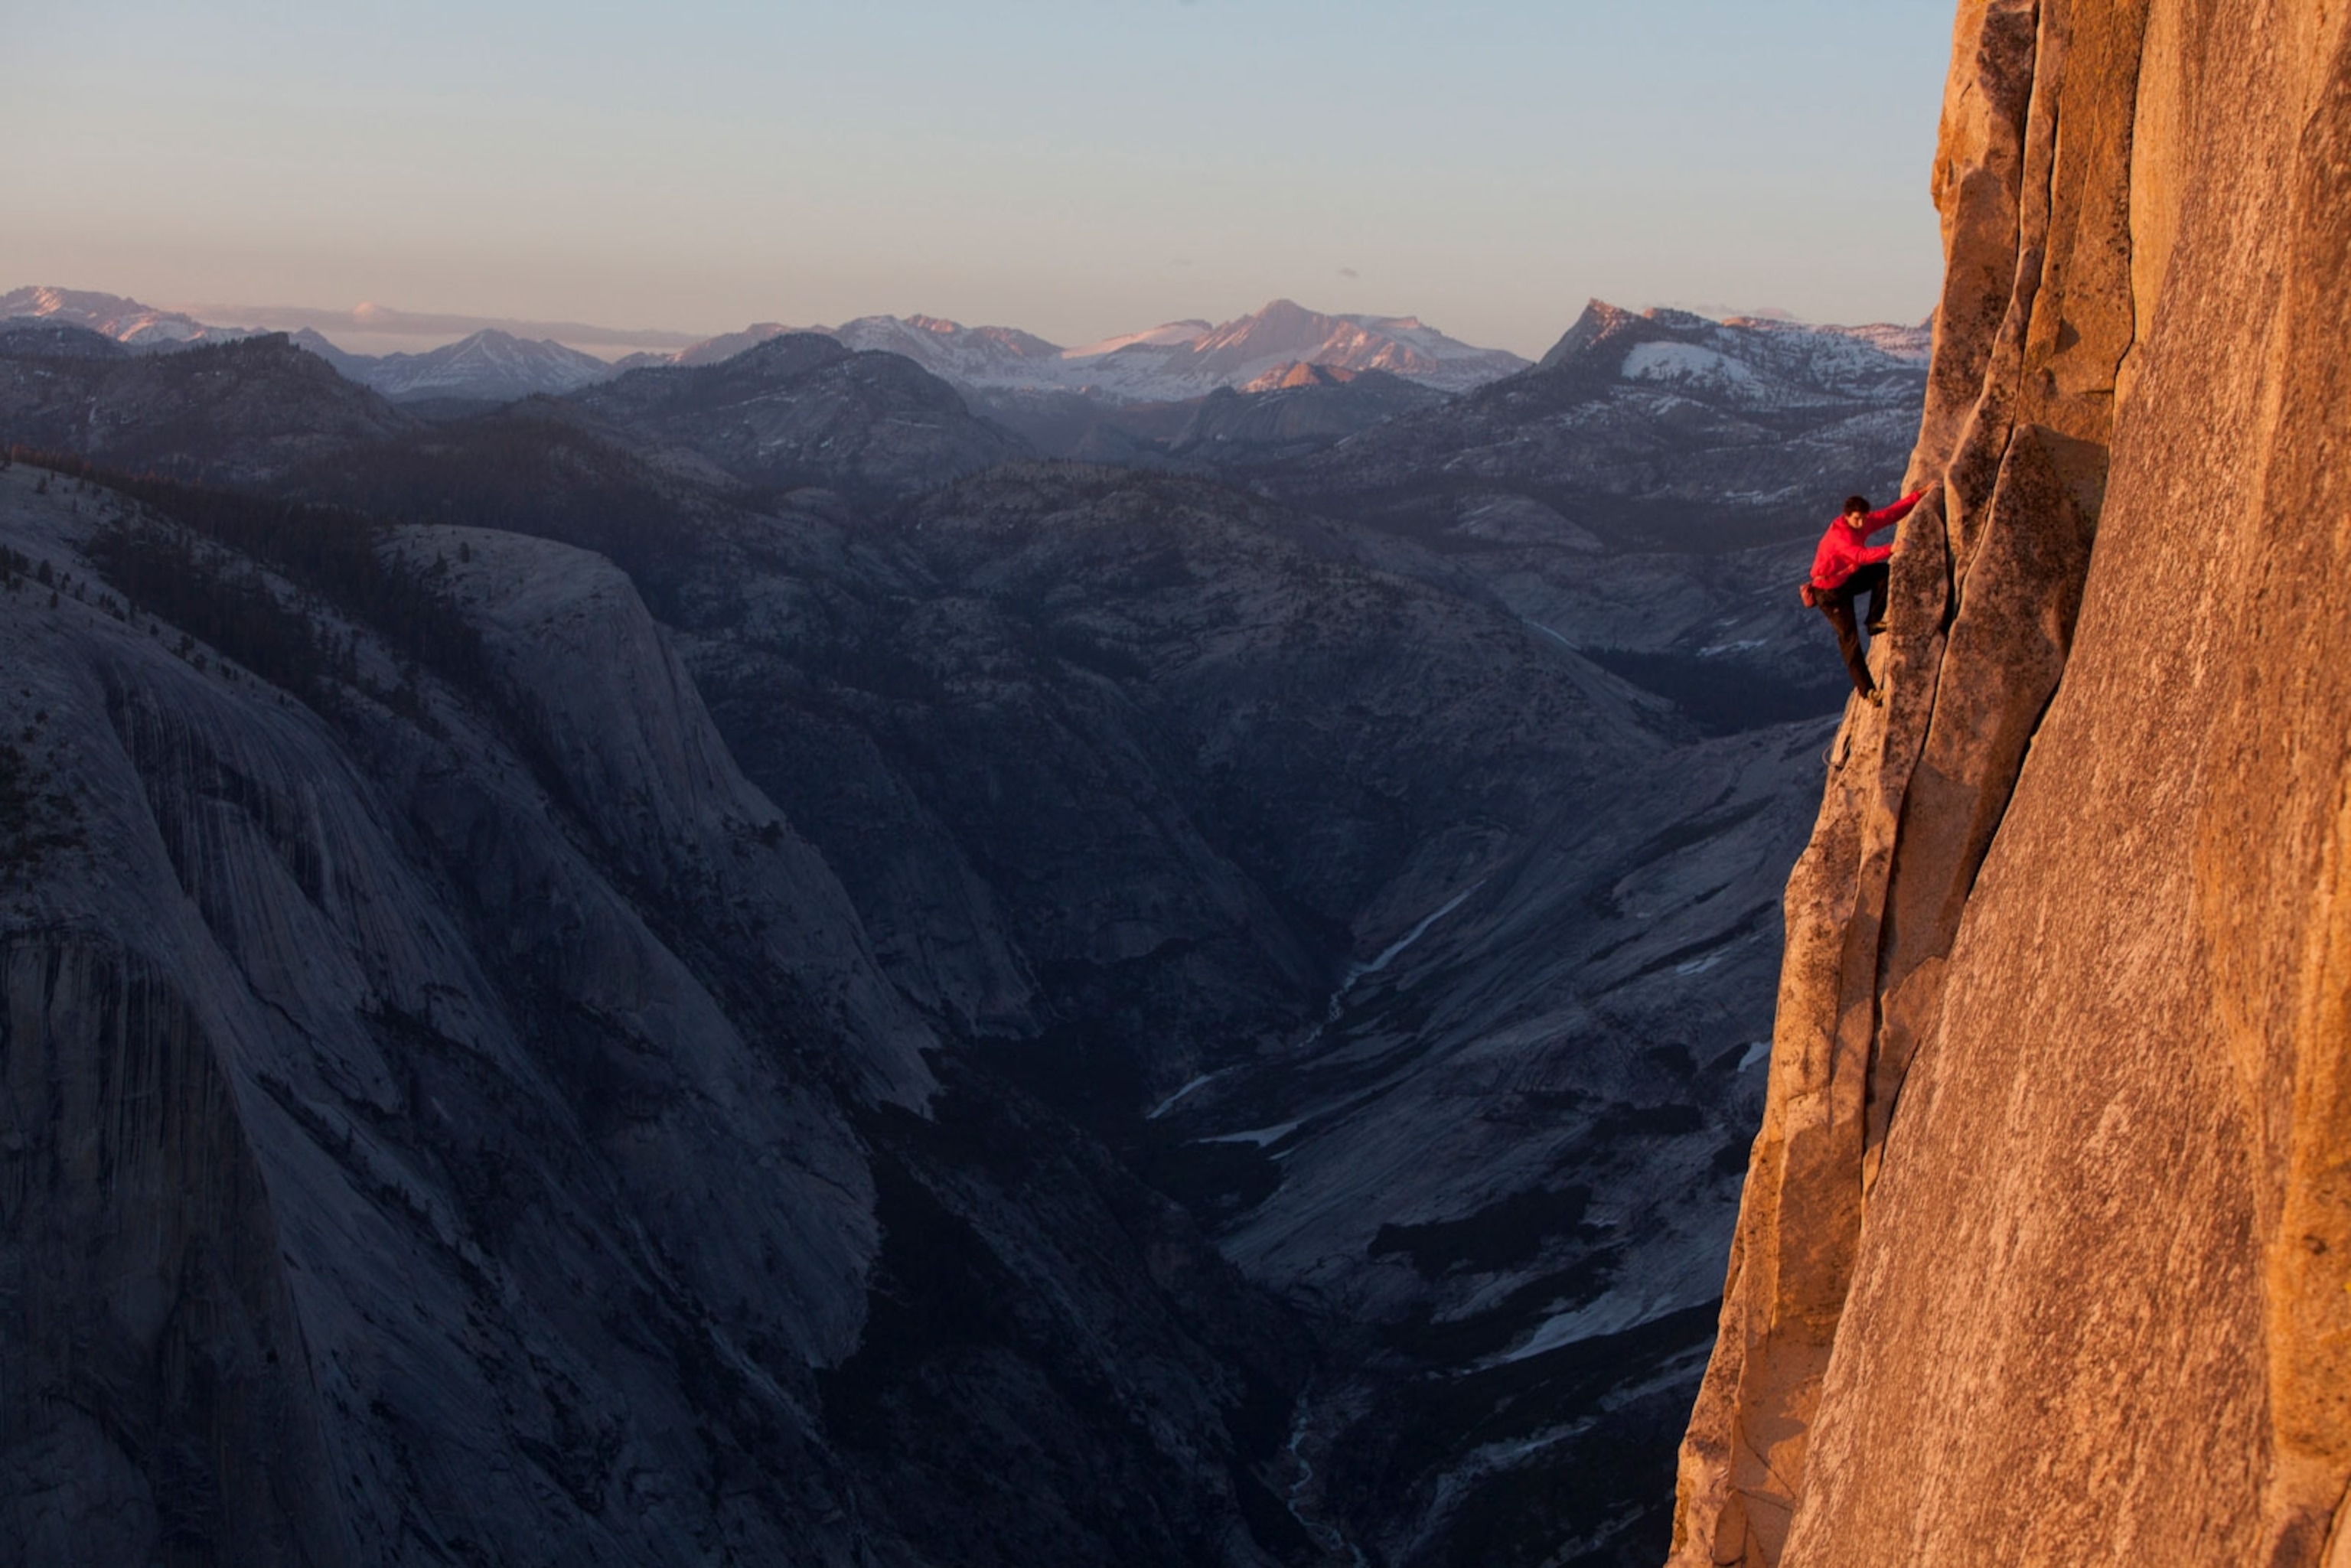 Photos of Free Solo Climber Alex Honnold's Most Epic Routes